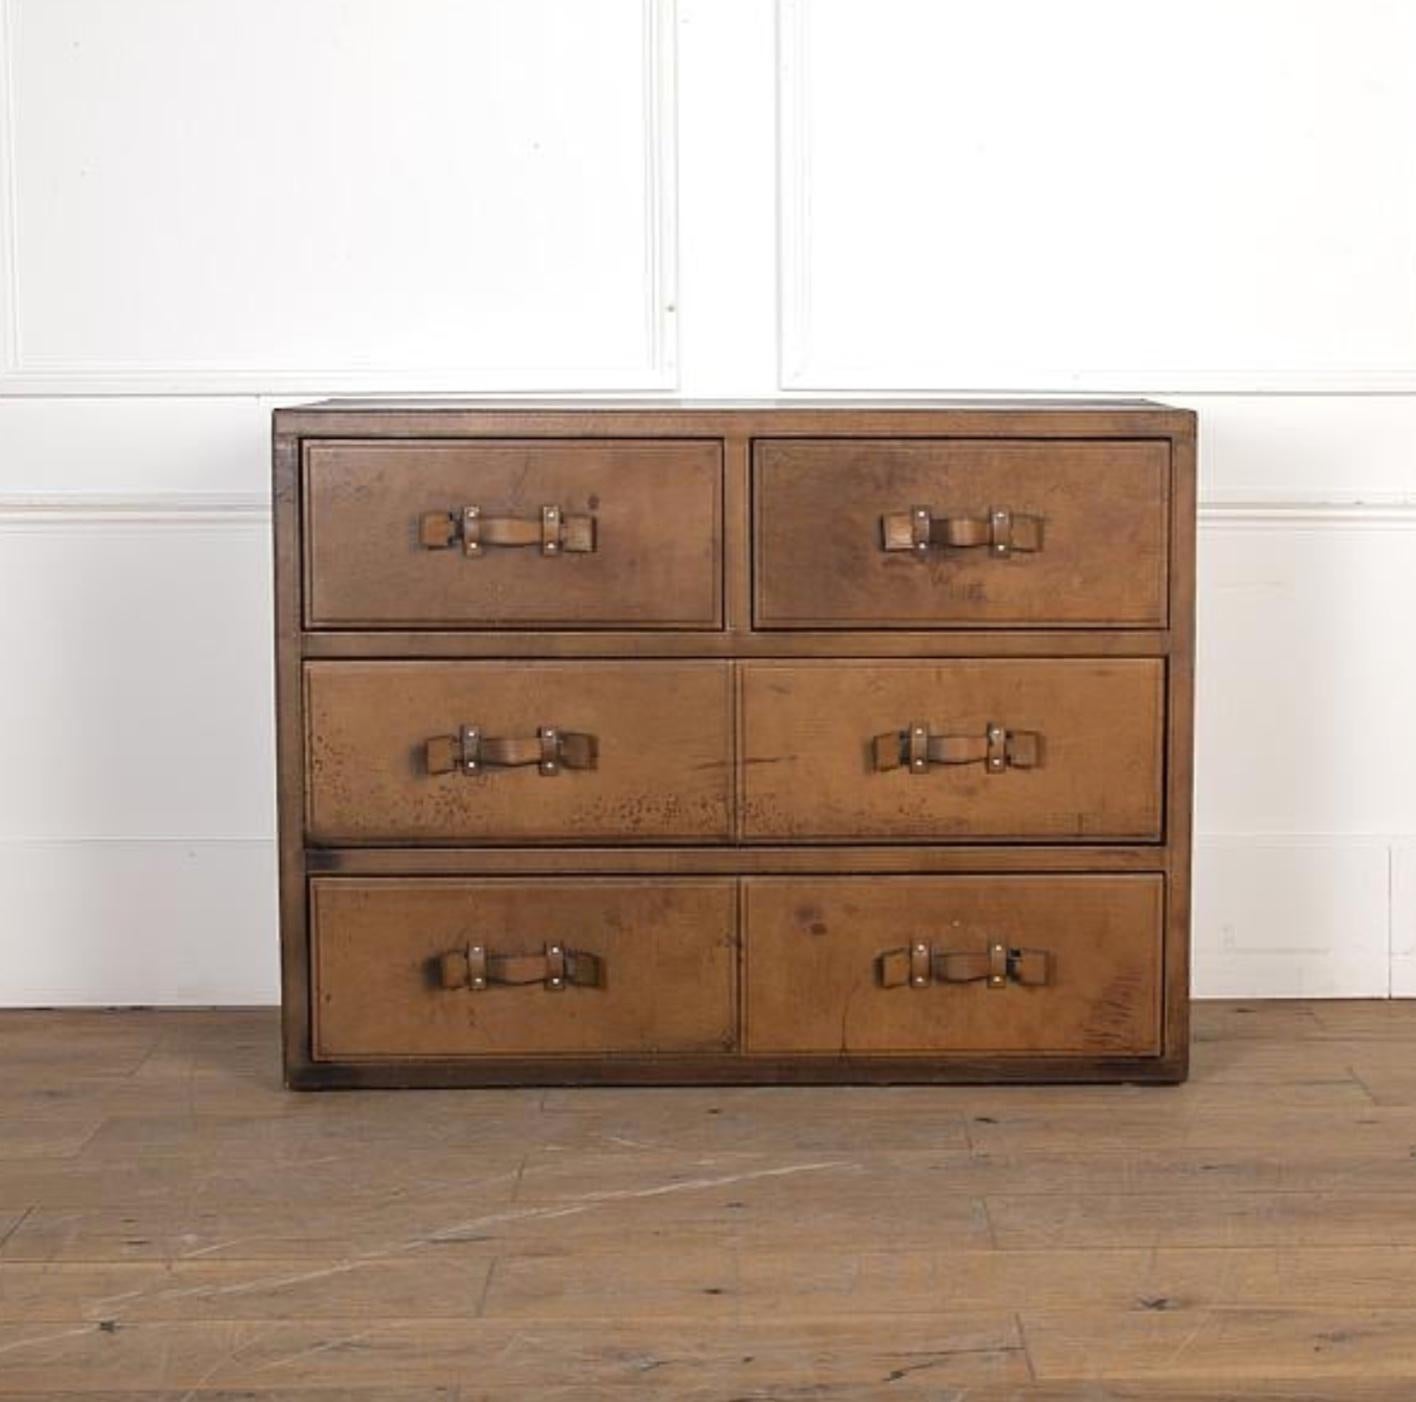 Leather covered chest of drawers from interwar England. Leather catch pull handles add great utilitarian flair. A handsome, understated piece with exceptional versatility. 

England, circa 1940

Dimensions: 36 H x 47 W x 18 D.